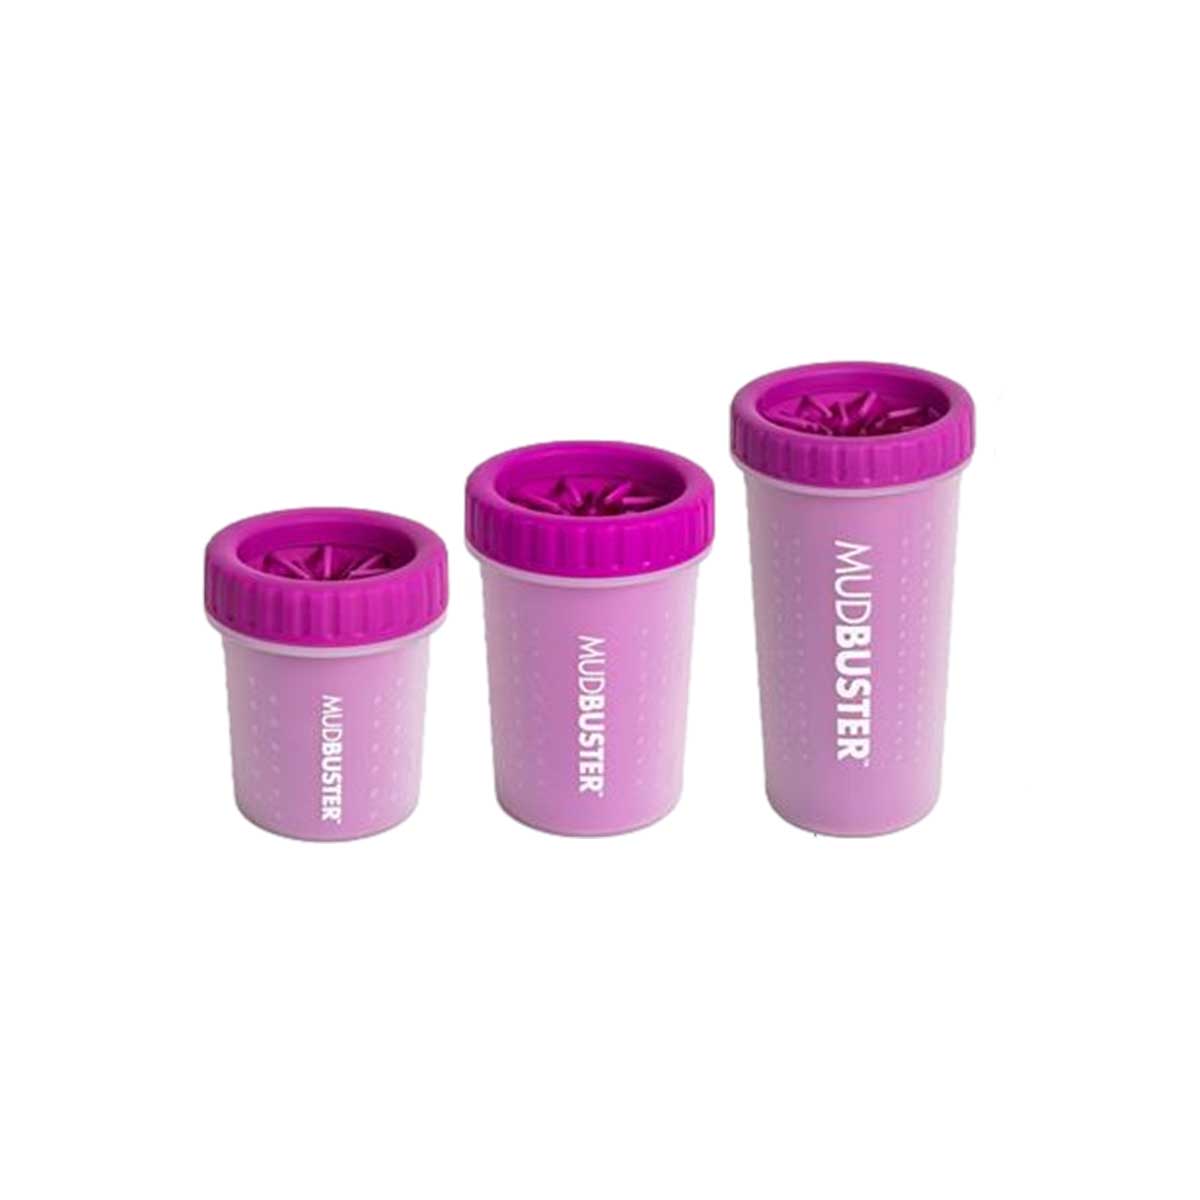 Dexas MudBuster® Portable Paw Washer in Pink | Pawlicious & Company